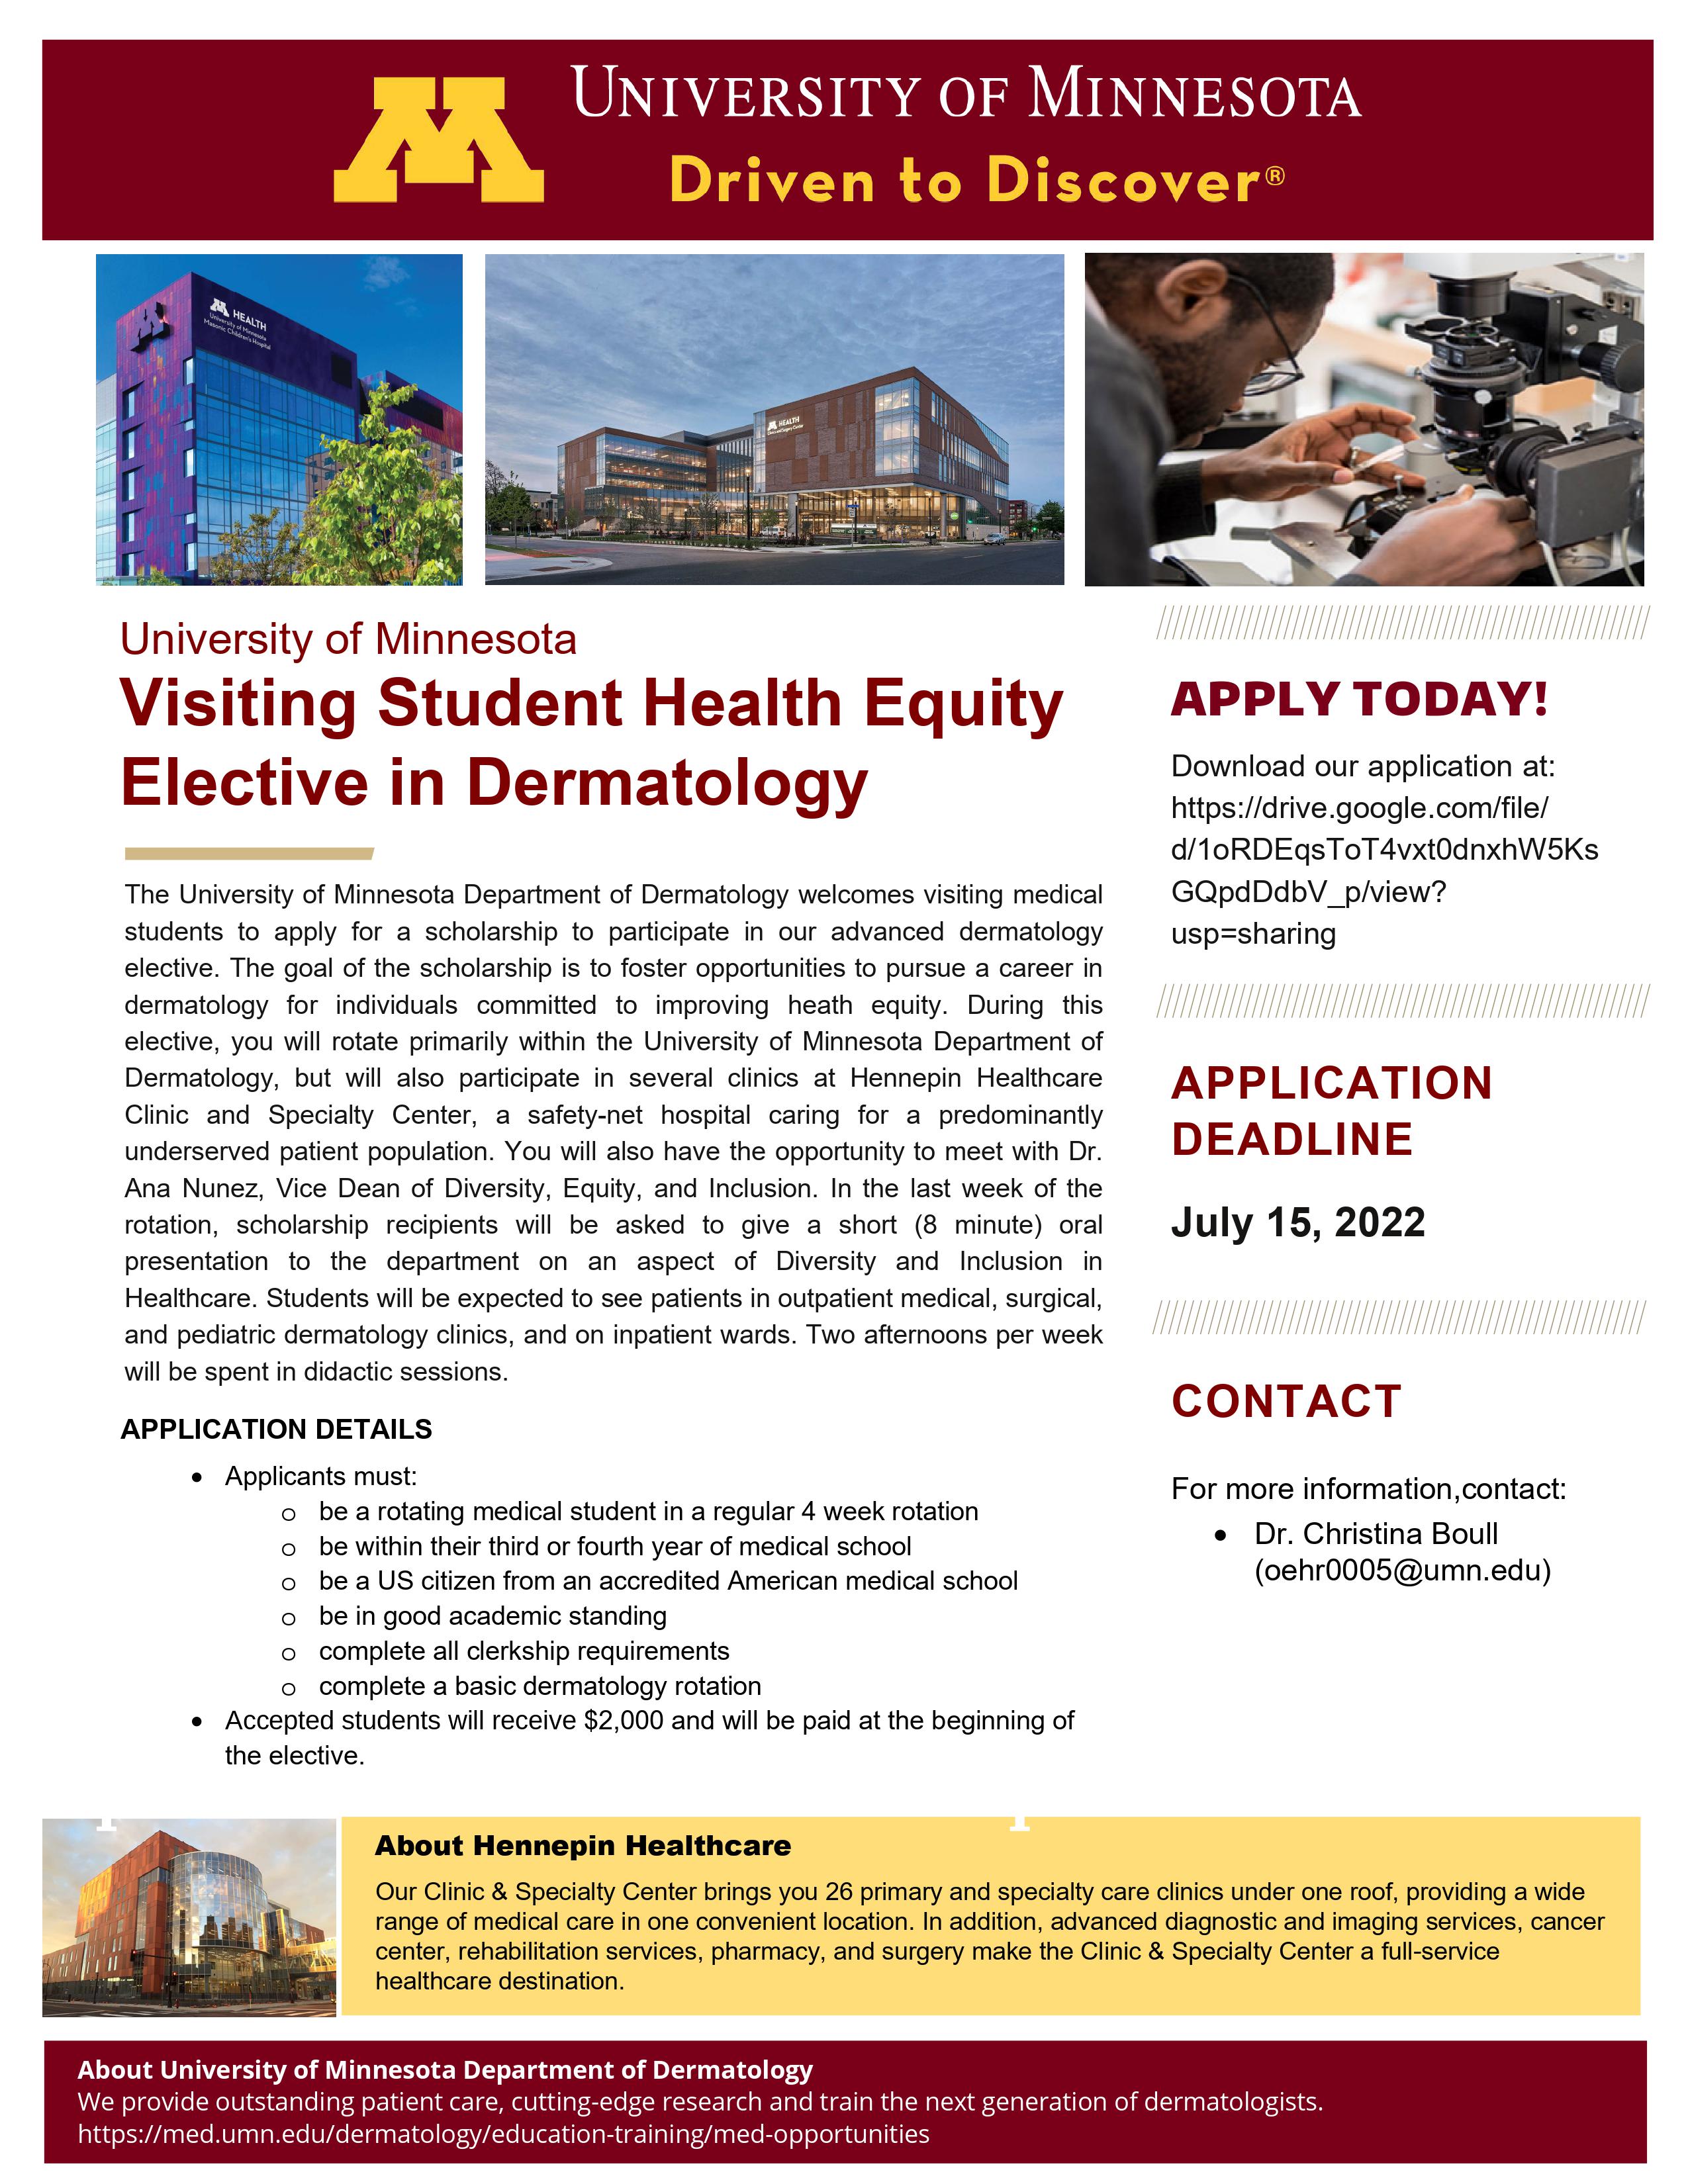 umn_visiting_student_health_equity_flyer